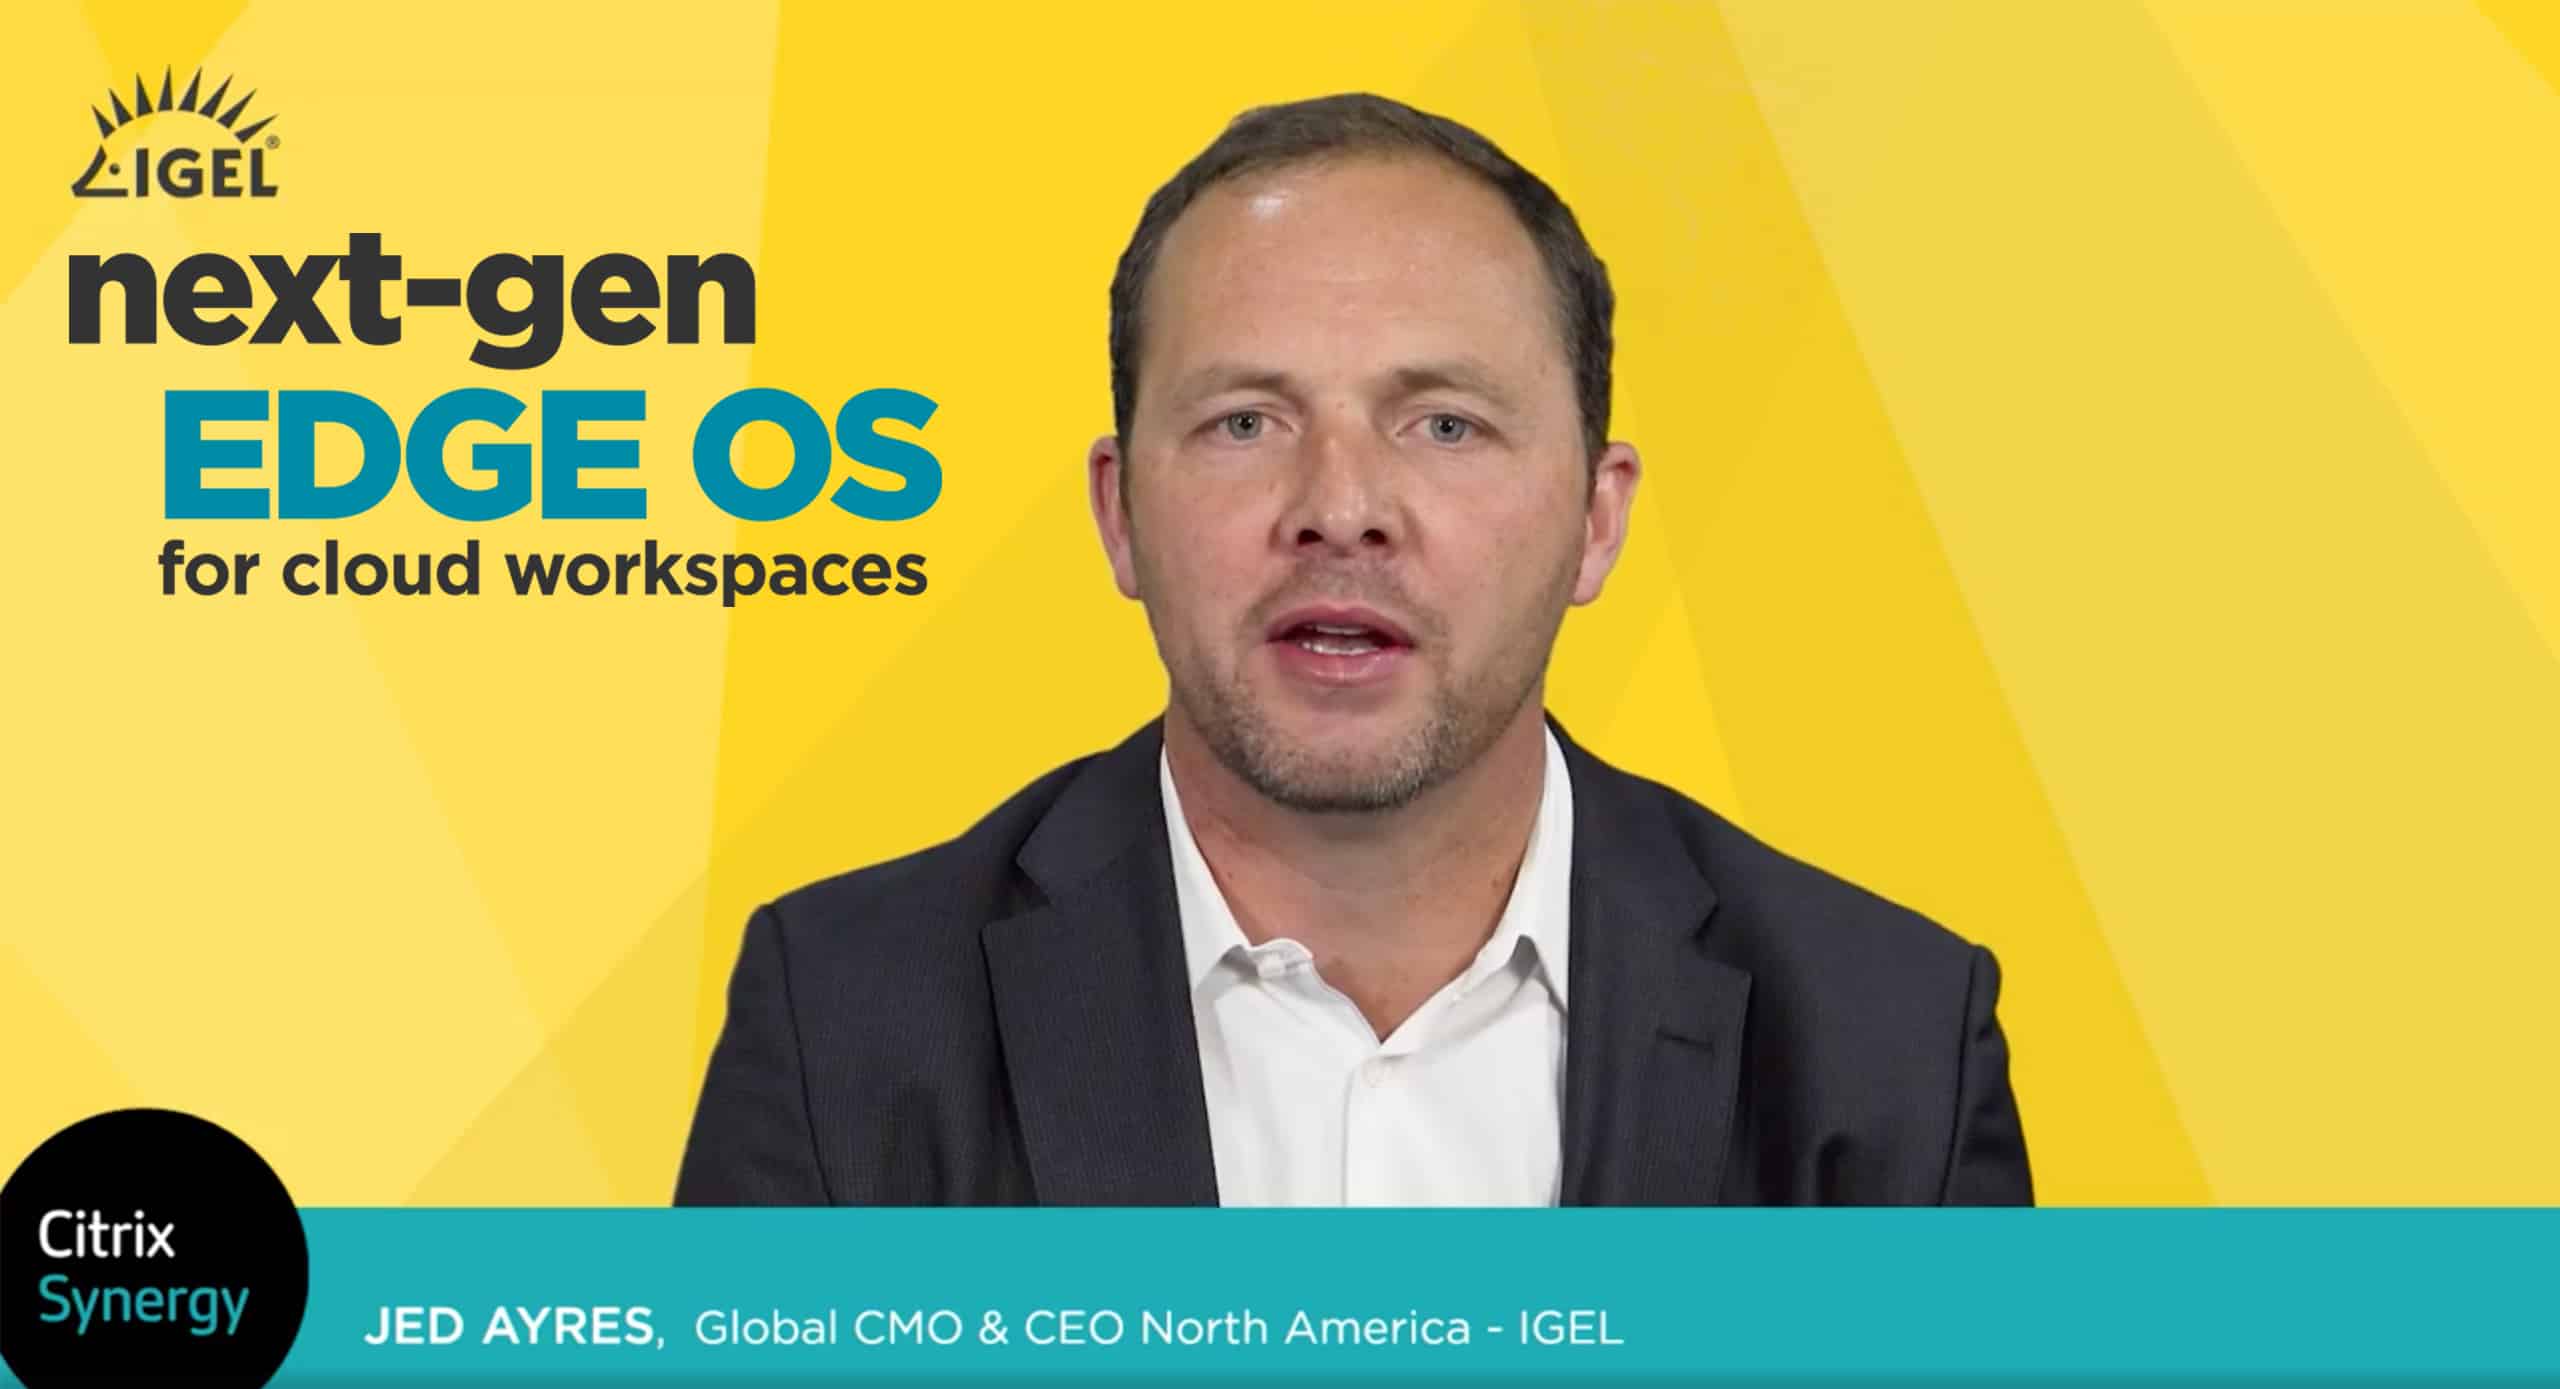 Jed Ayres talks about the Next-Gen Edge OS